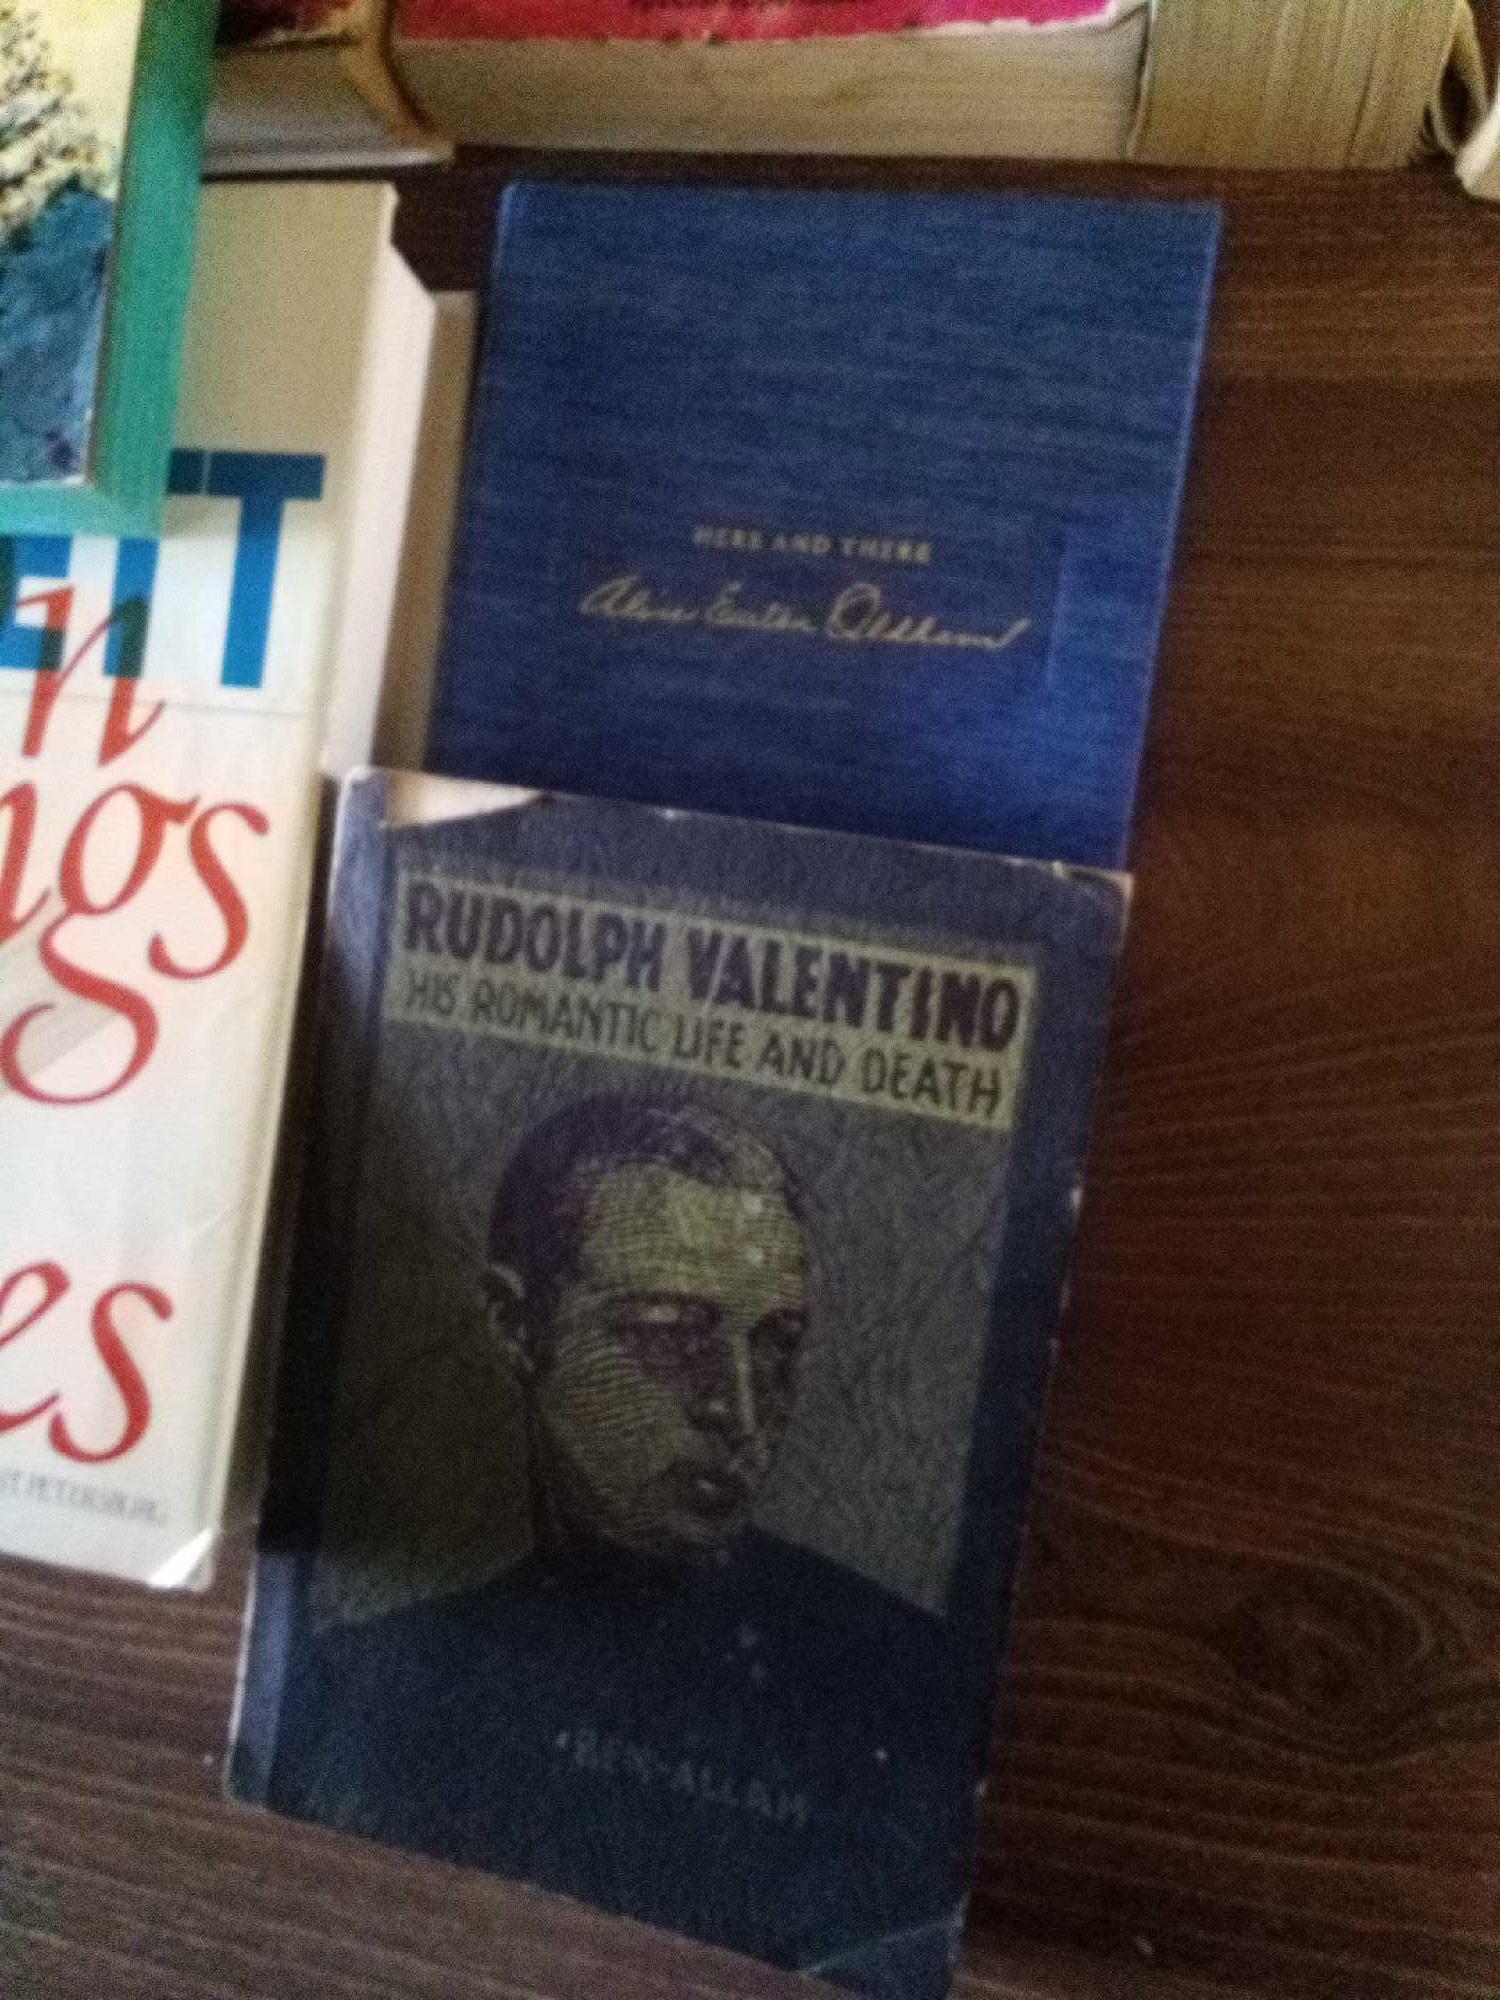 GROUP OF BOOKS INCLUDING FICTION CLASSICS LIKE VOLTAIRE AND DANTE WITH REFERENCE BOOKS LIKE SPANISH